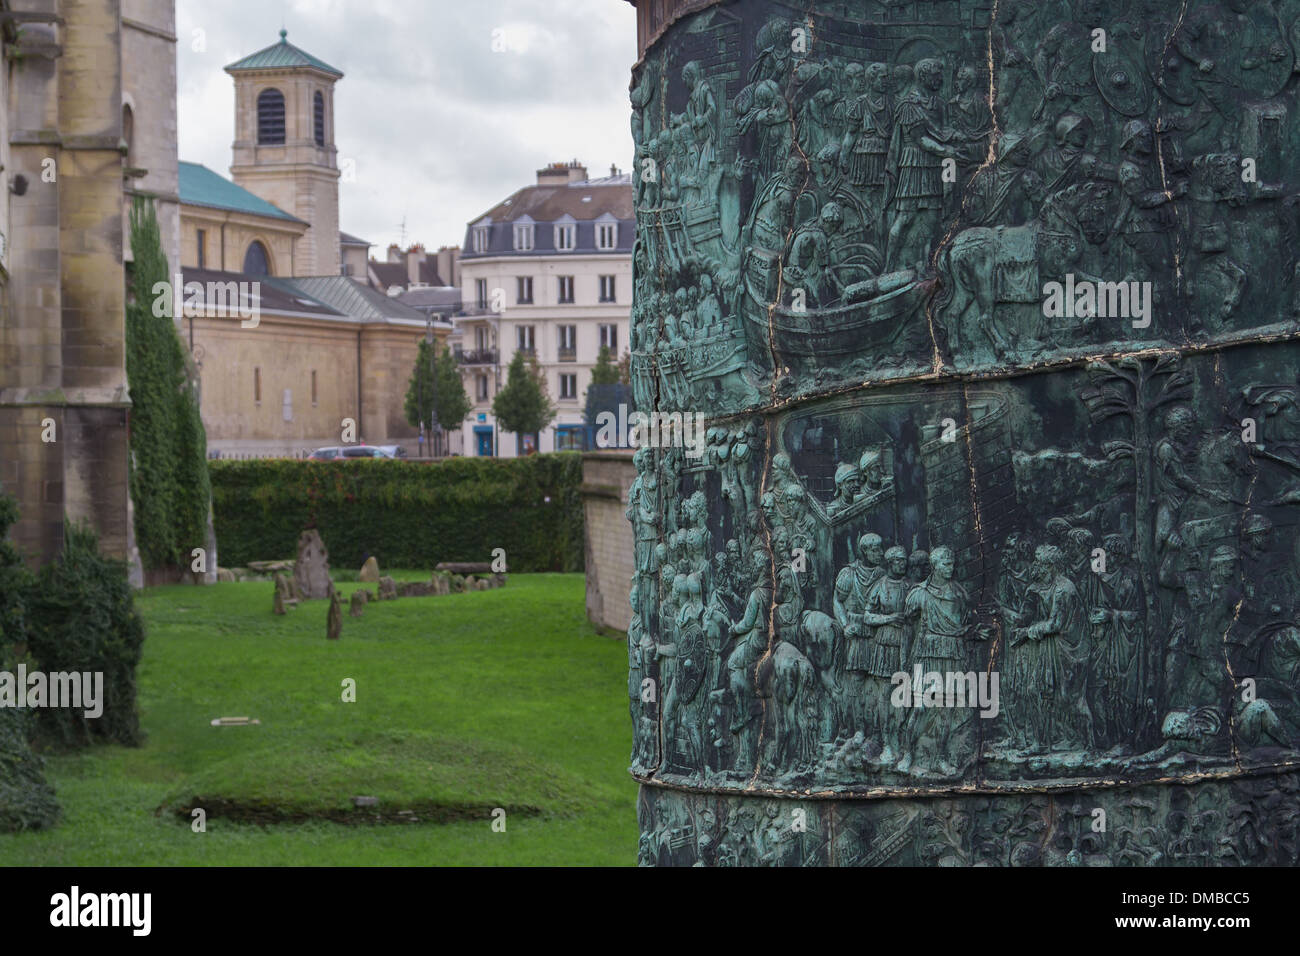 TRAJAN‚ÄôS COLUMN, 19TH CENTURY ELECTROTYPING OF THE LOWER PART OF THE ANCIENT ROMAN MONUMENT, MOAT OF THE CHATEAU OF SAINT-GERMAIN-EN-LAYE TODAY HOUSING THE NATIONAL MUSEUM OF ARCHAEOLOGY, SAINT-GERMAIN-EN-LAYE, YVELINES (78), FRANCE Stock Photo